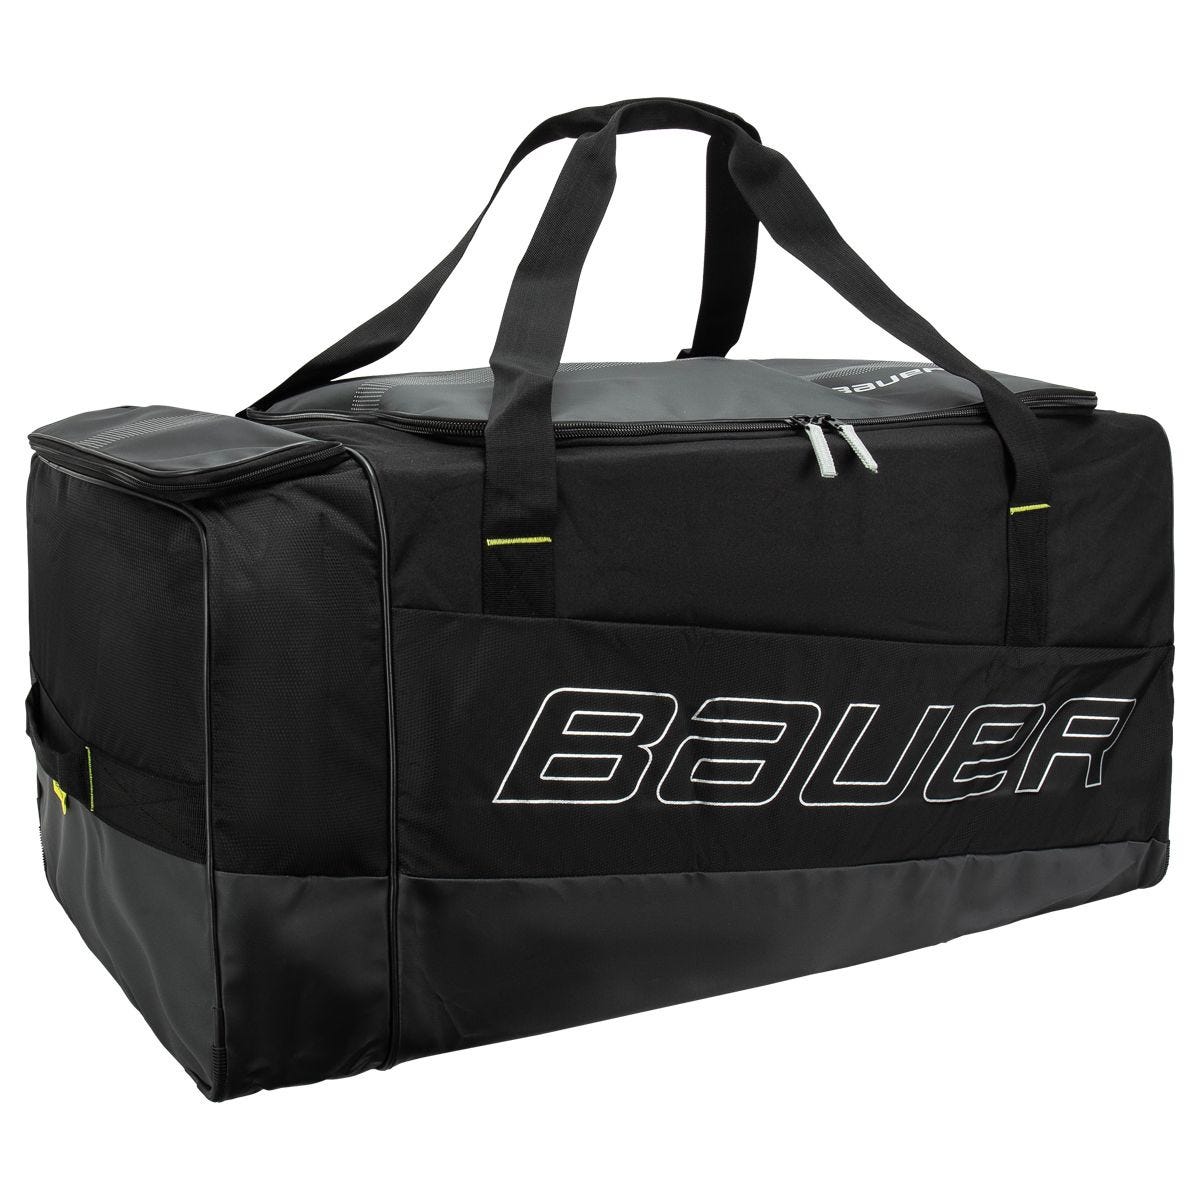 St. Louis Blues 21 Carry-On Luggage